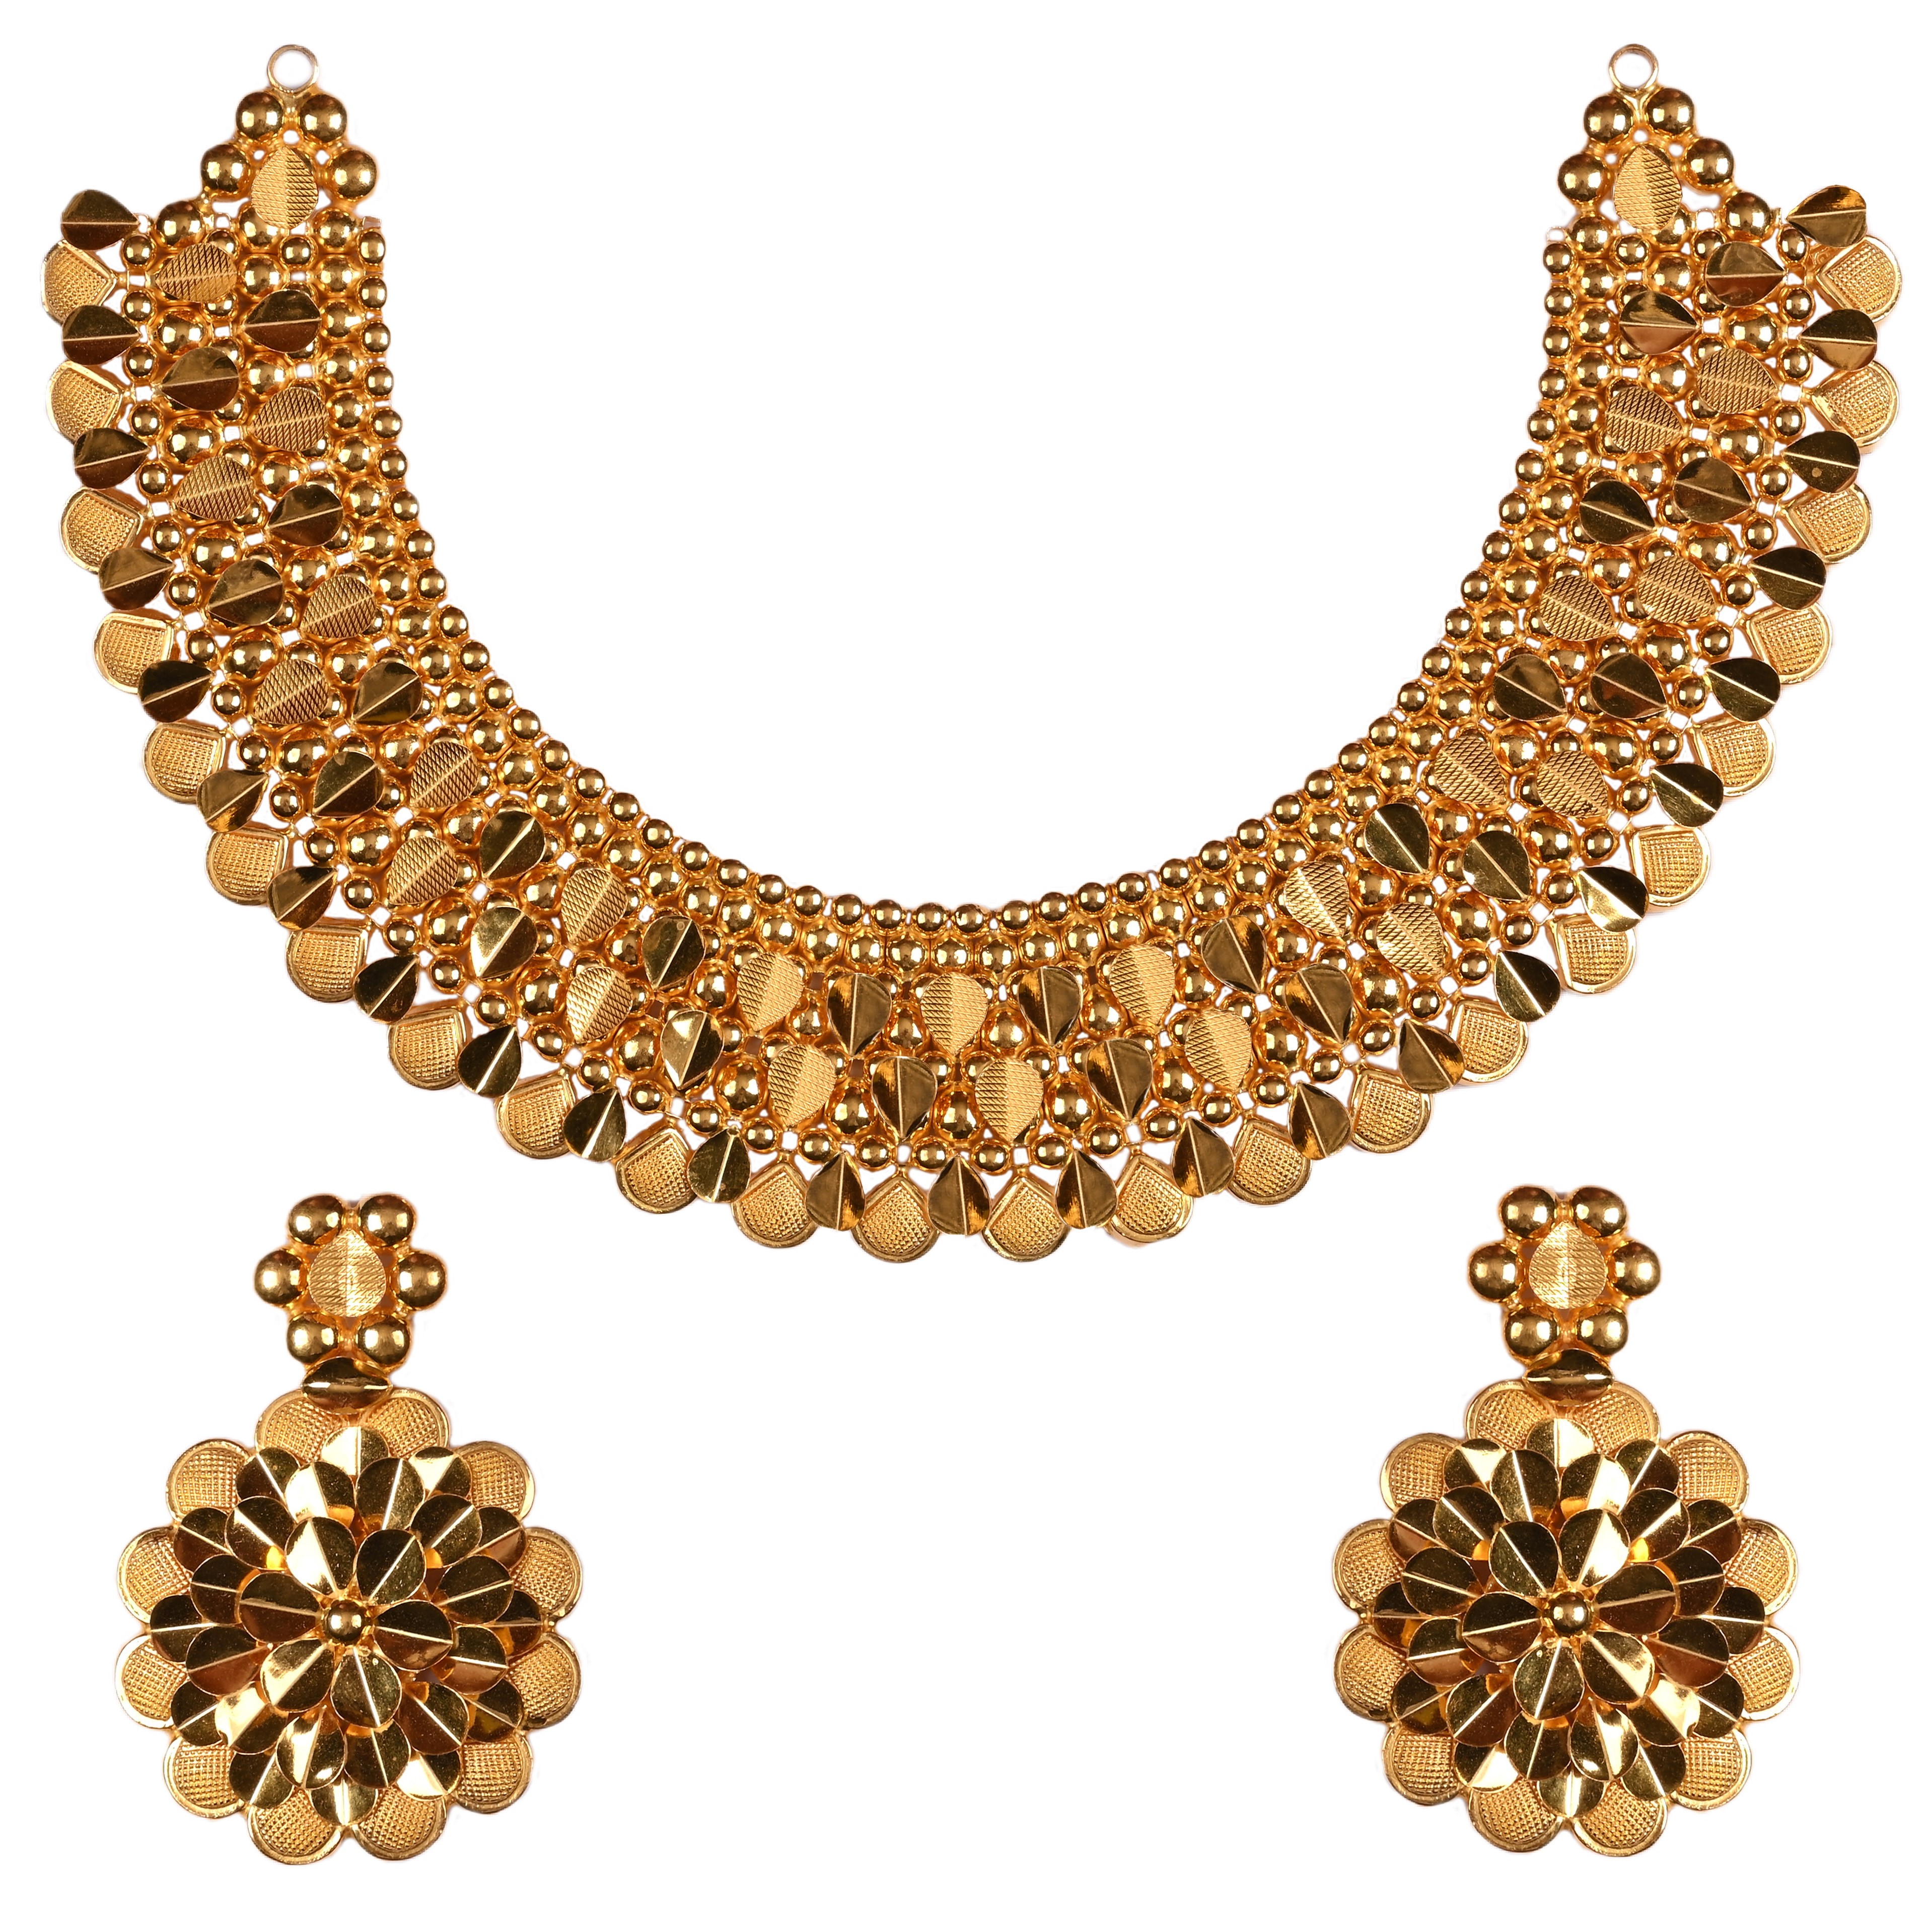 Hira Panna 22k Gold Necklace & Earrings For Party & Wedding Wear